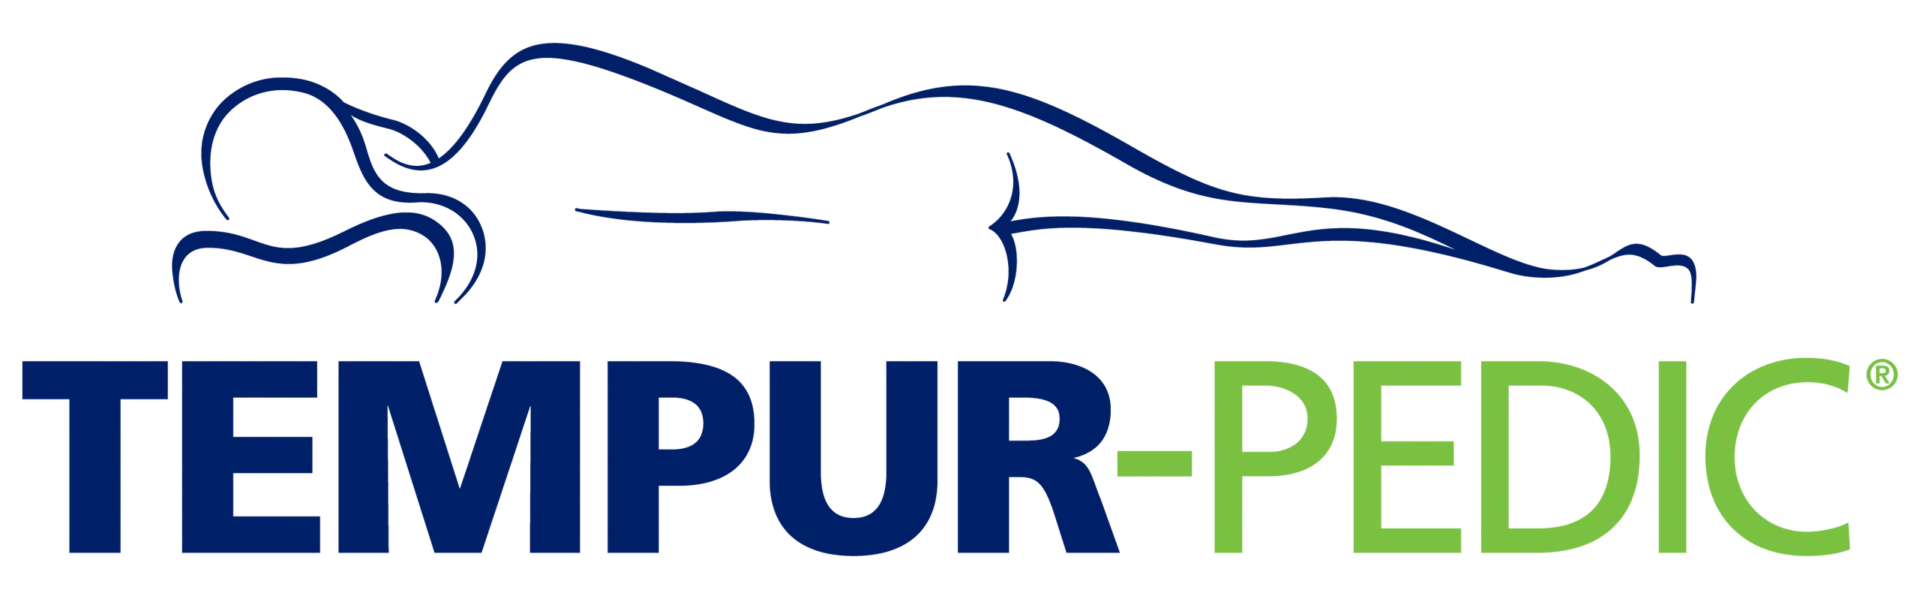 A blue and green logo for pur-plus